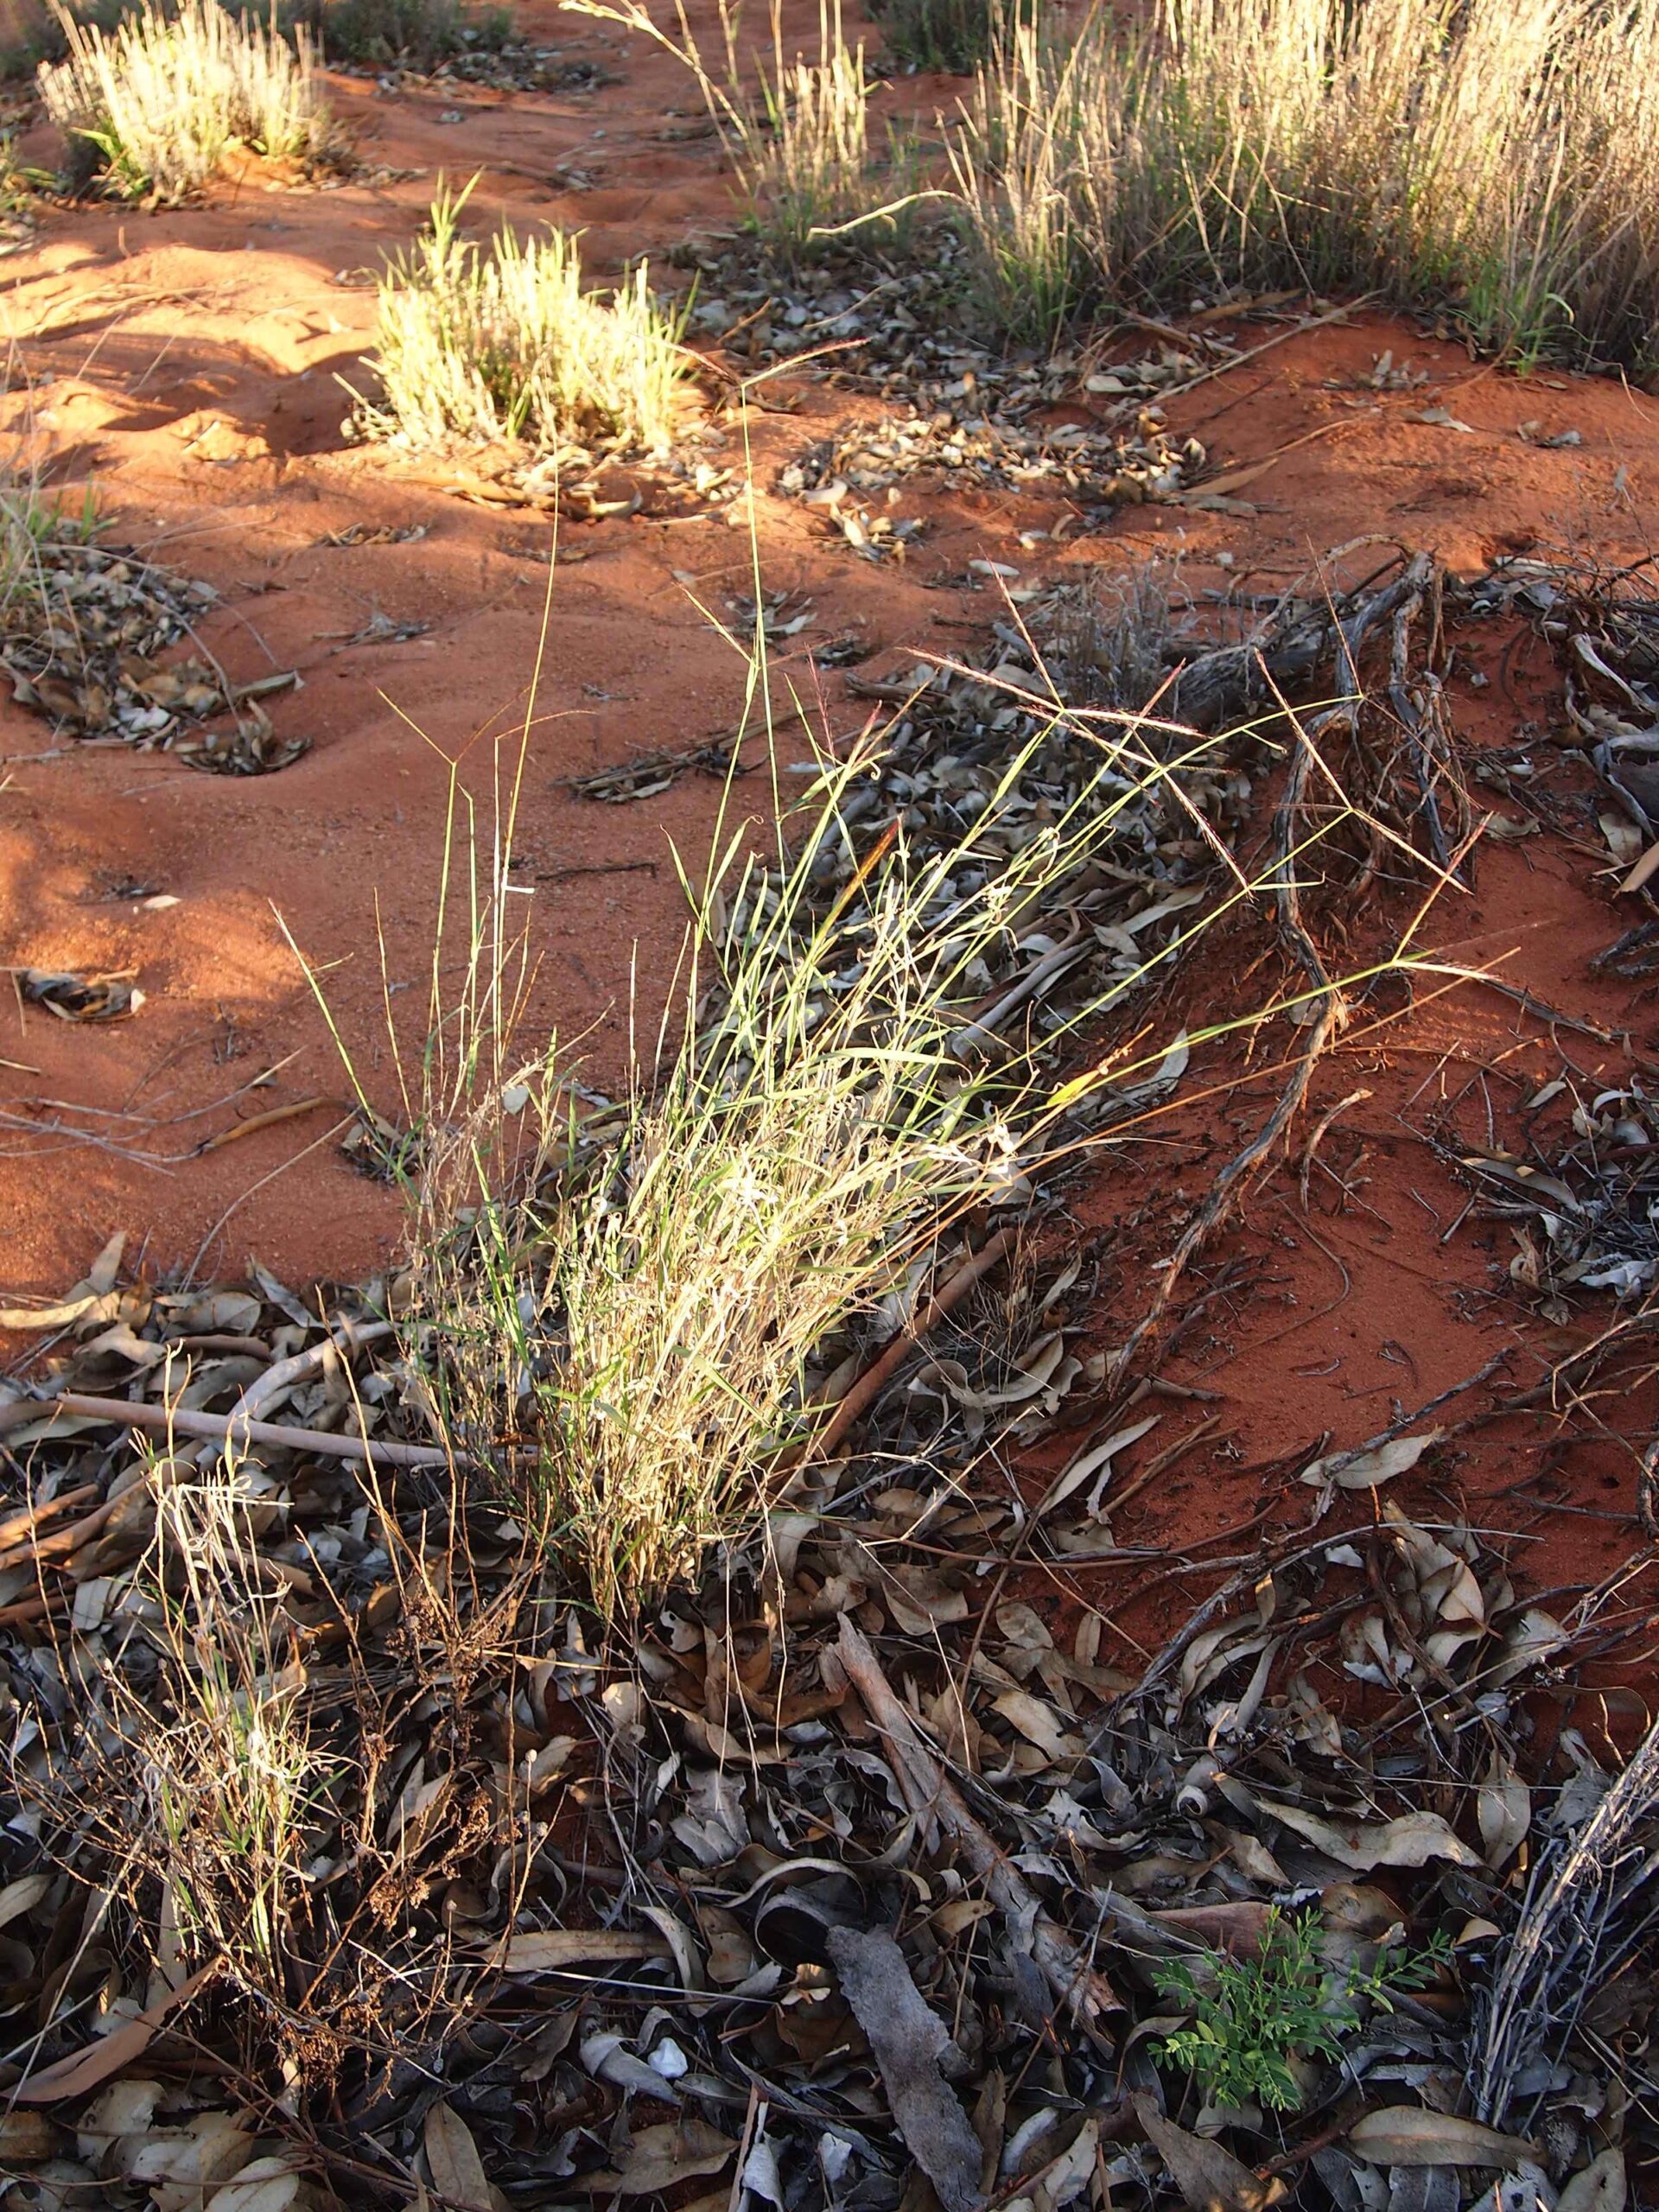 Photograph of a small clump of curly windmill grass. The grass appears yellow with inflorescences that are bent sideways from the stems. The ground around the grass is sandy and red and strewn with dried leaves.